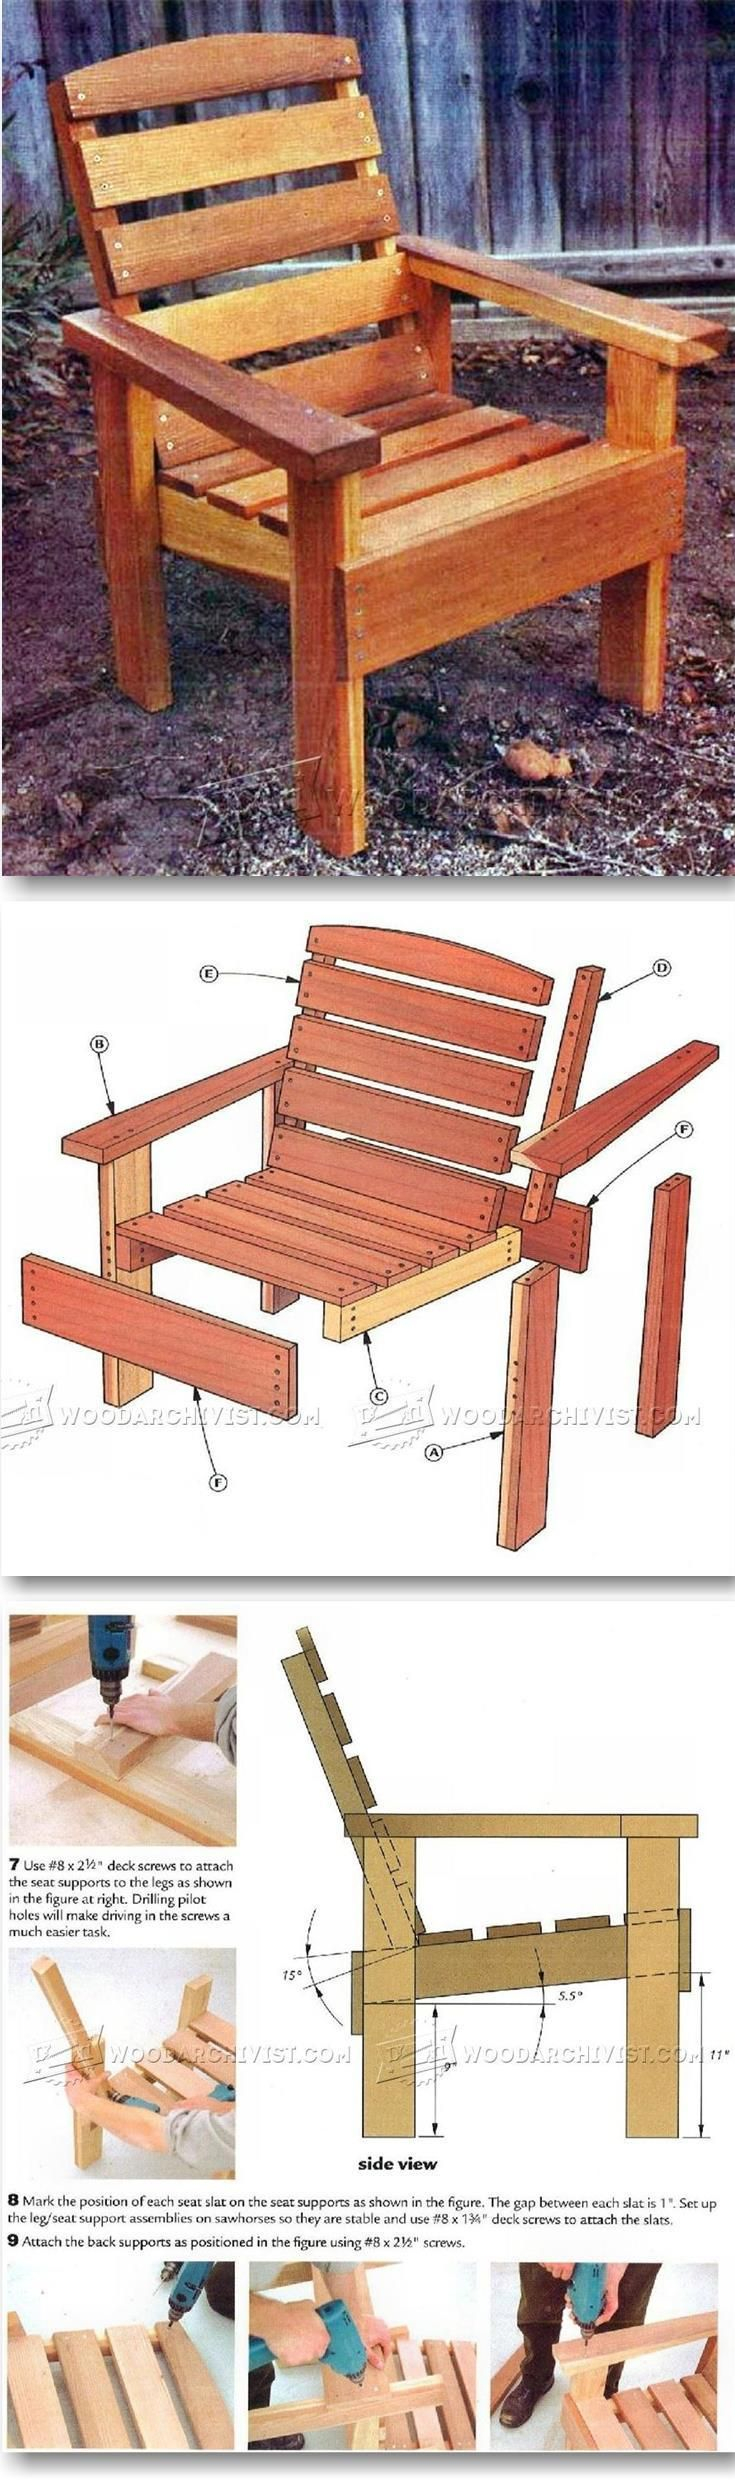 Deck Chair Plans Outdoor Furniture Plans Diy Outdoor with regard to dimensions 735 X 2489